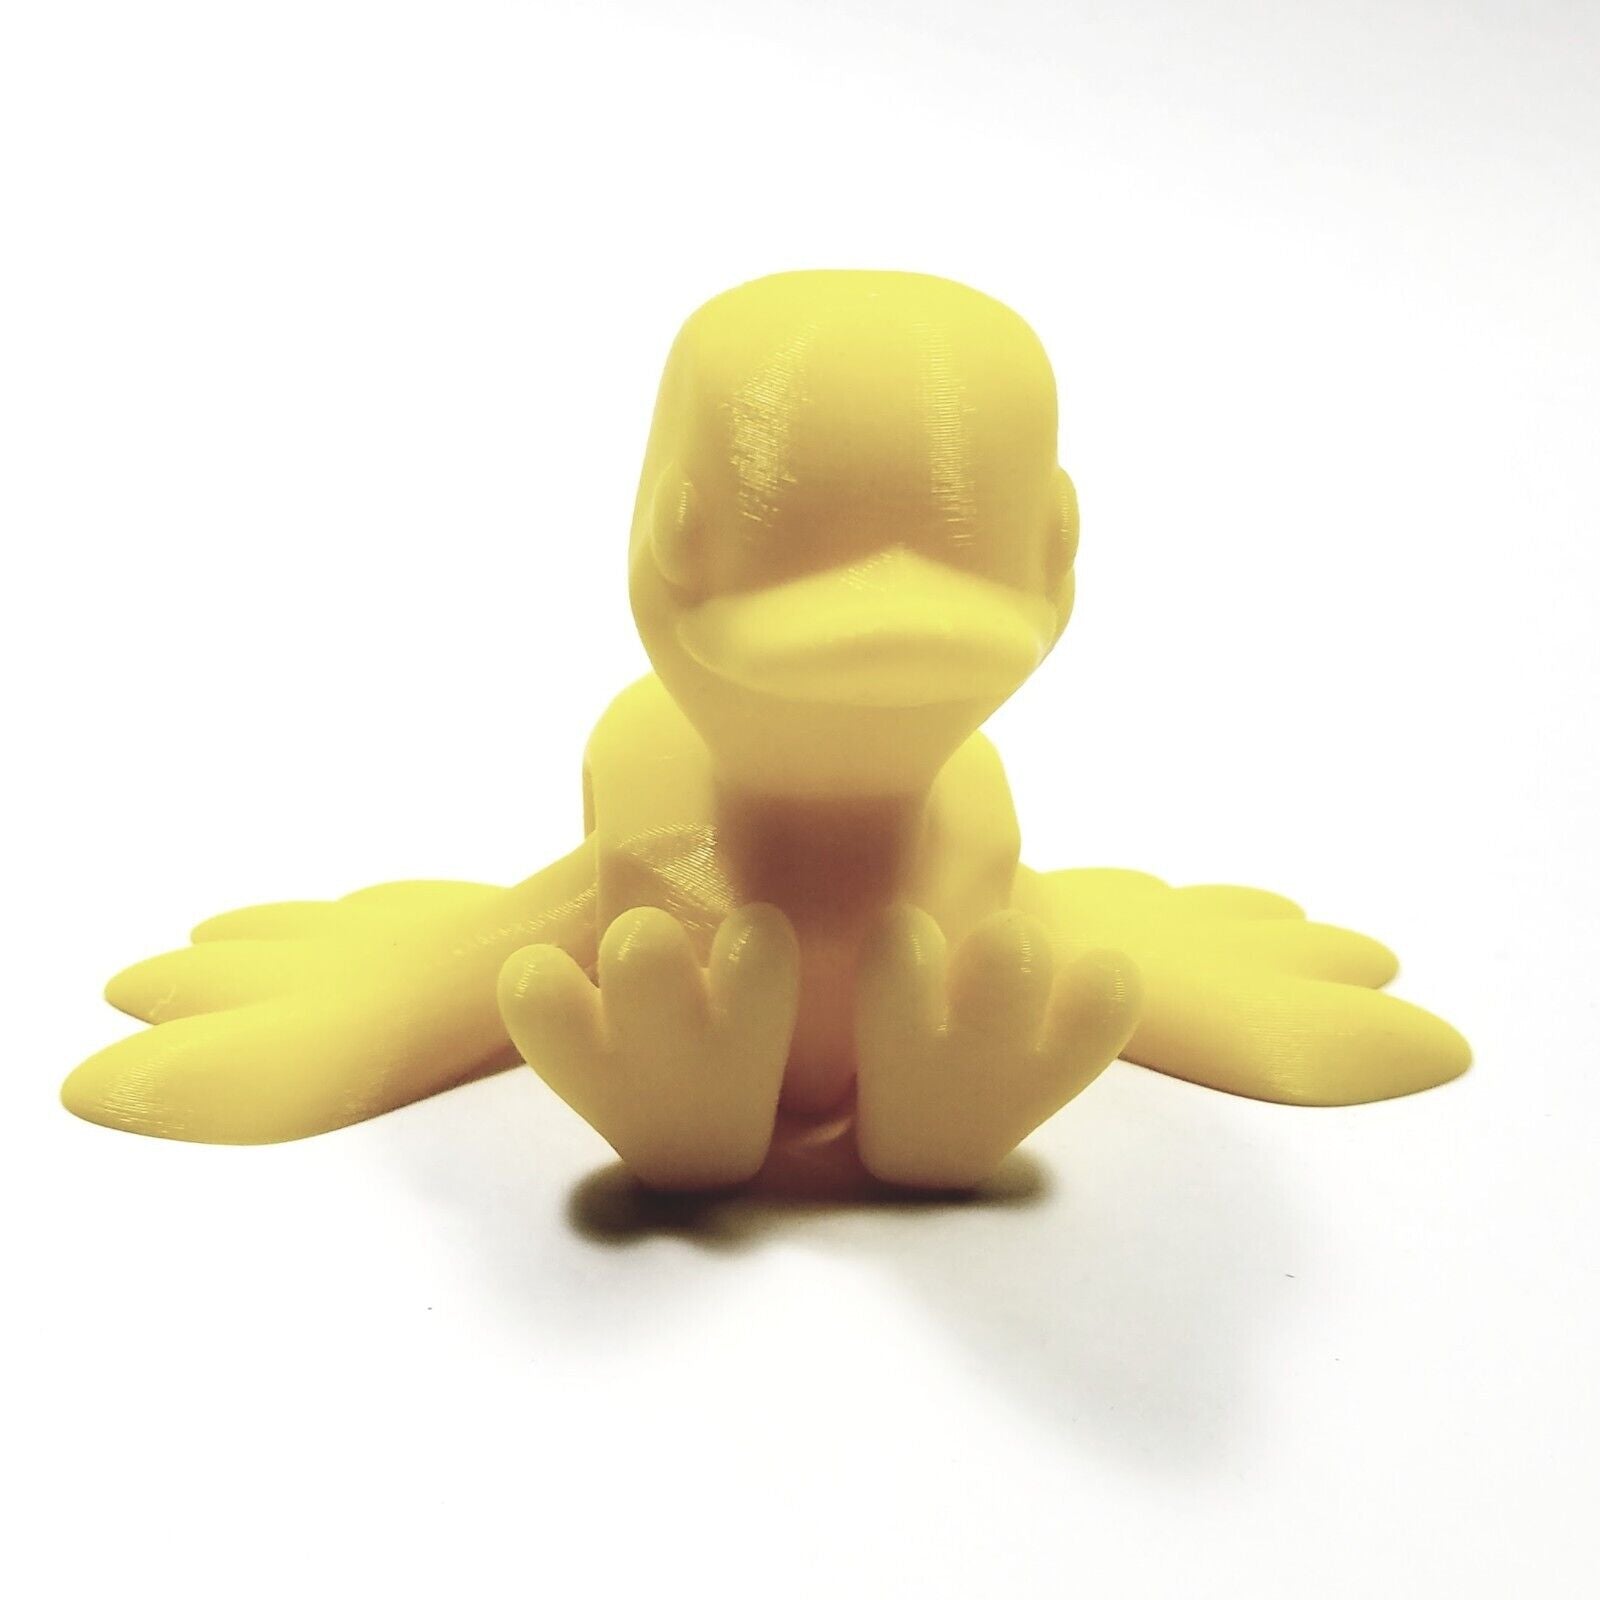 Classic Yellow Rubber Duck with Wings